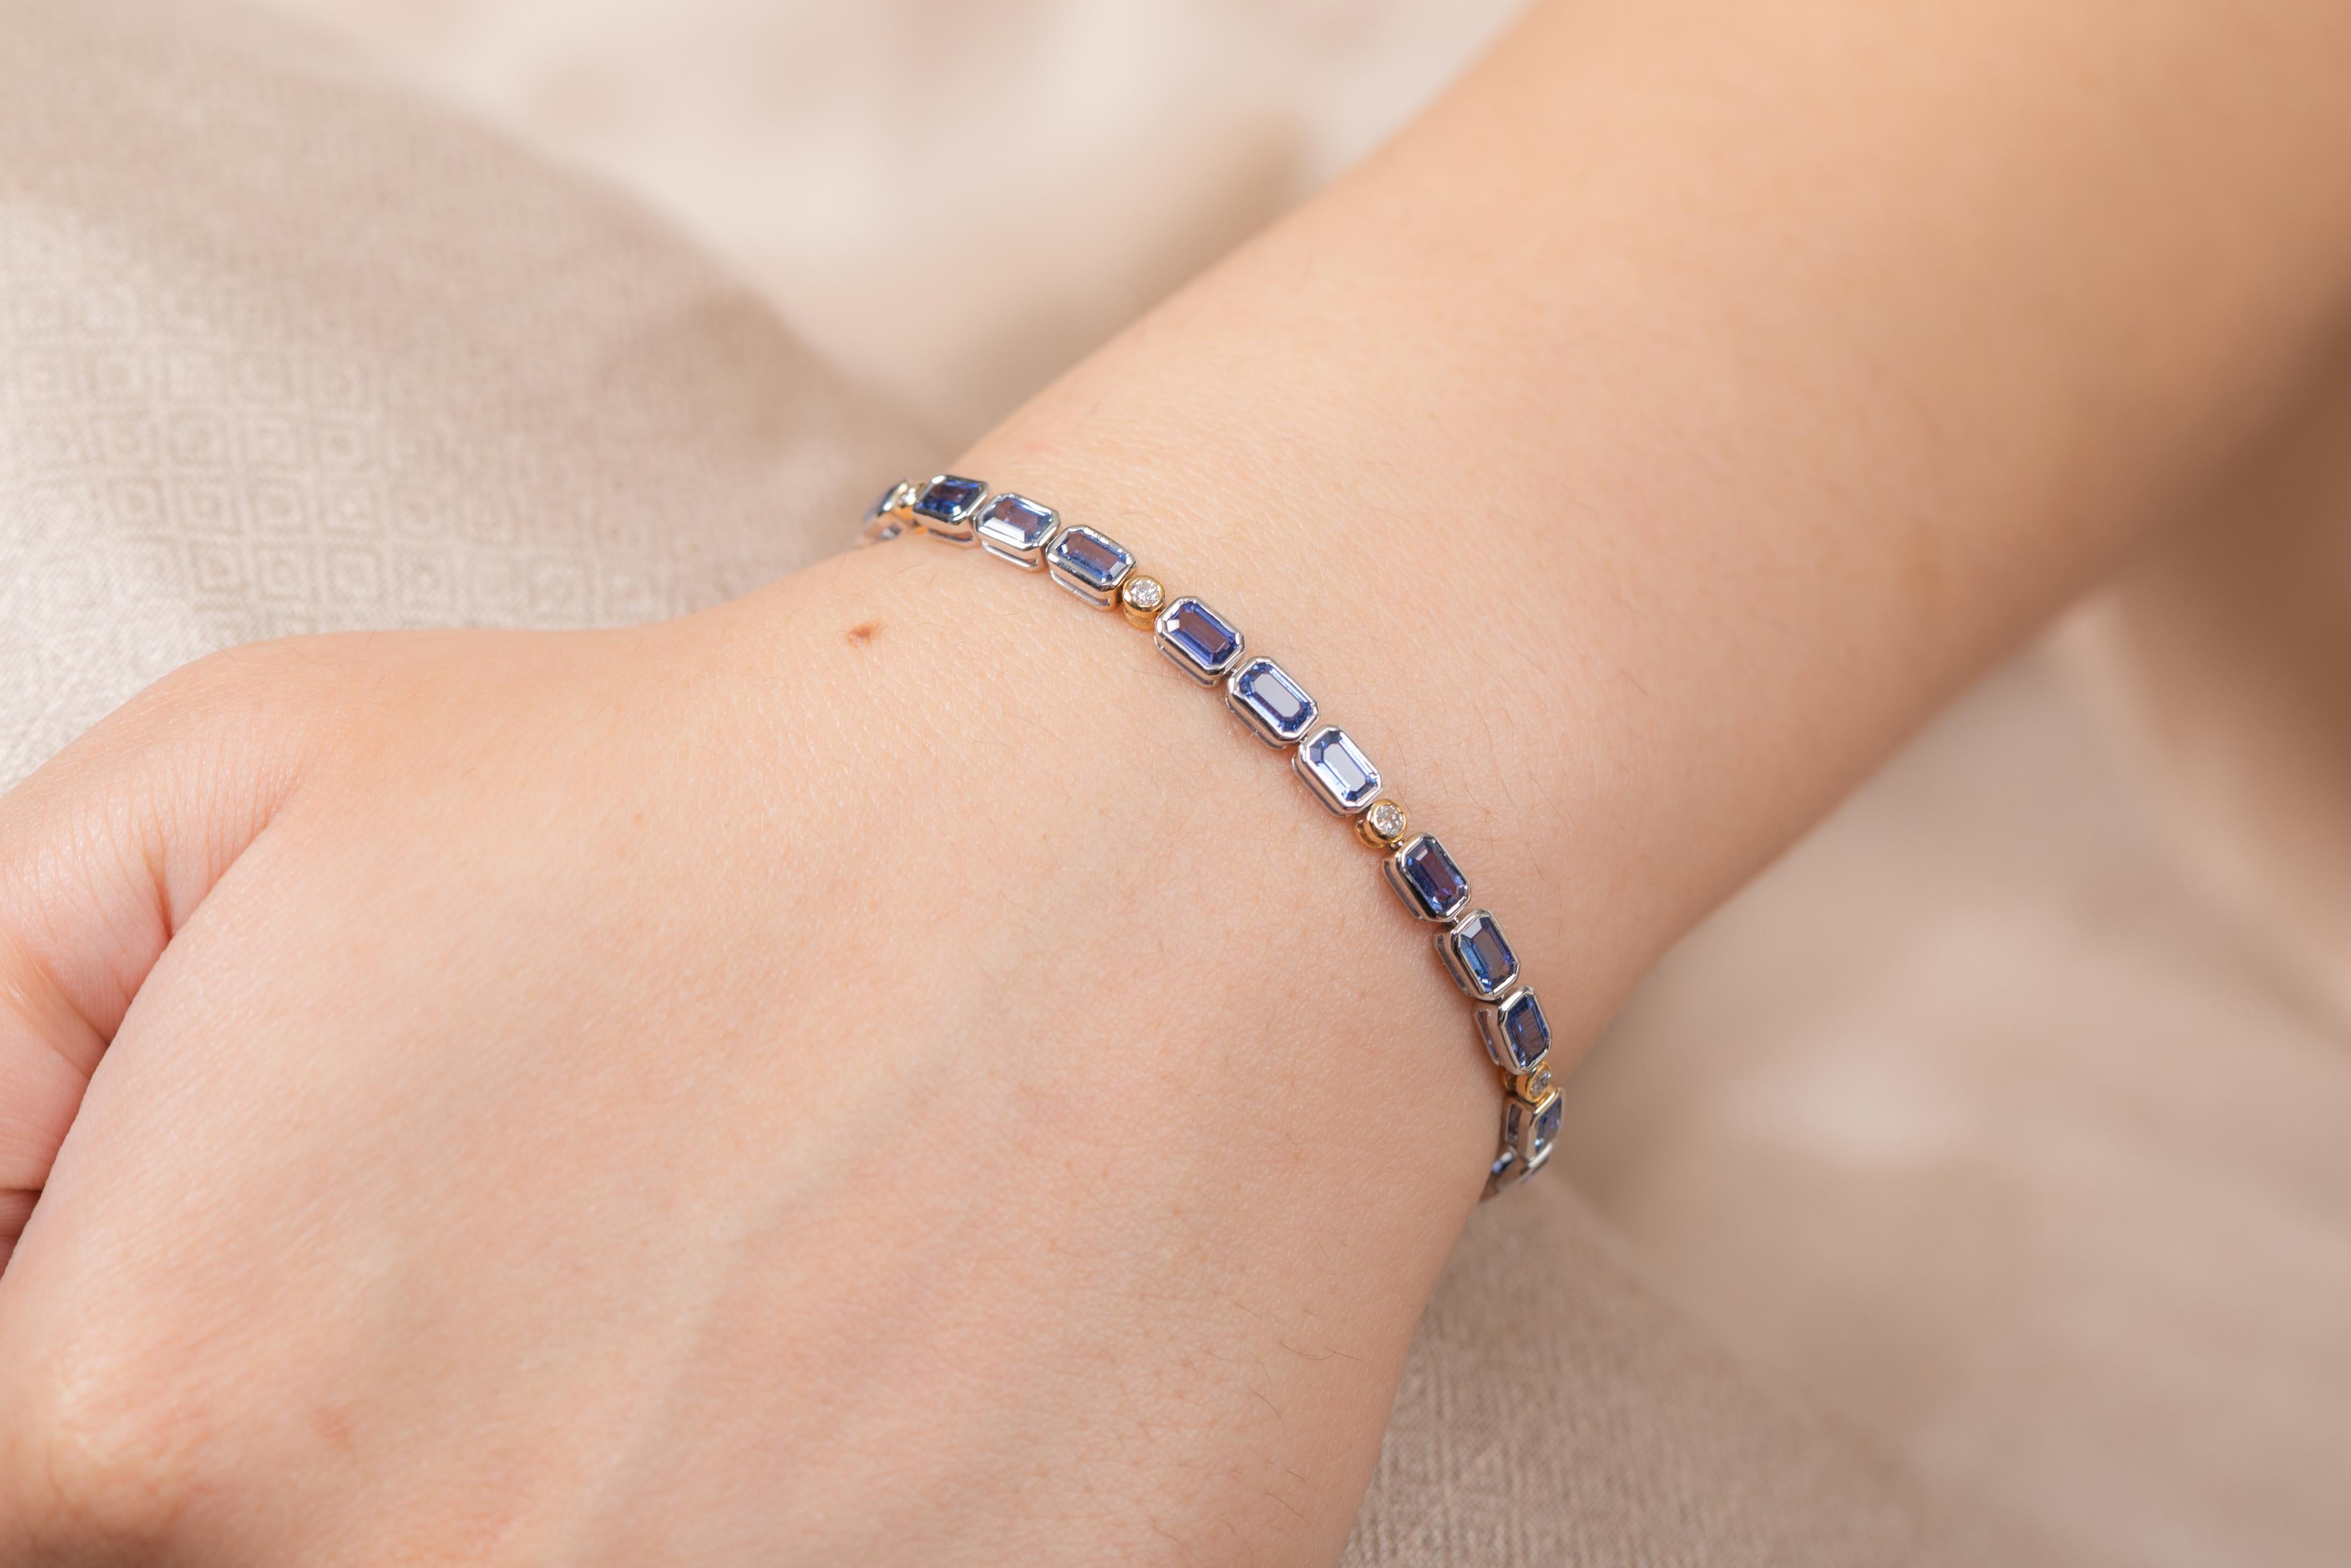 Octagon Cut Blue Sapphire Tennis Bracelet in 18K White Gold with Diamonds For Sale 2